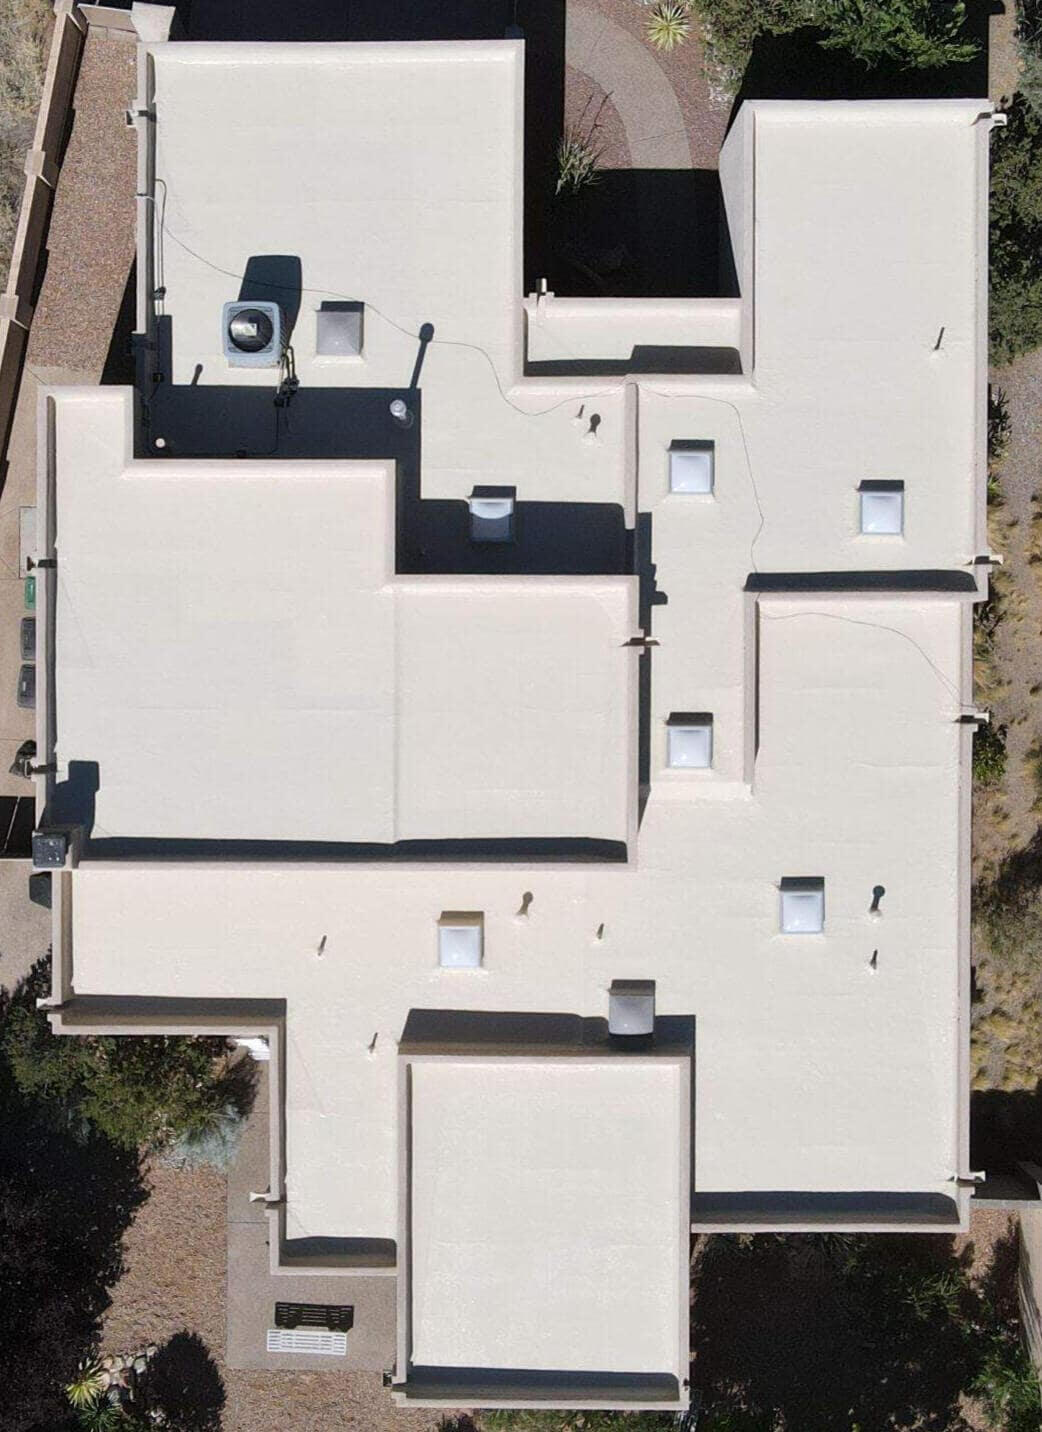 Flat residential roof in Albuquerque, New Mexico, recently replaced and now featuring a white TPO (Thermoplastic Polyolefin) installation for durability and energy efficiency.